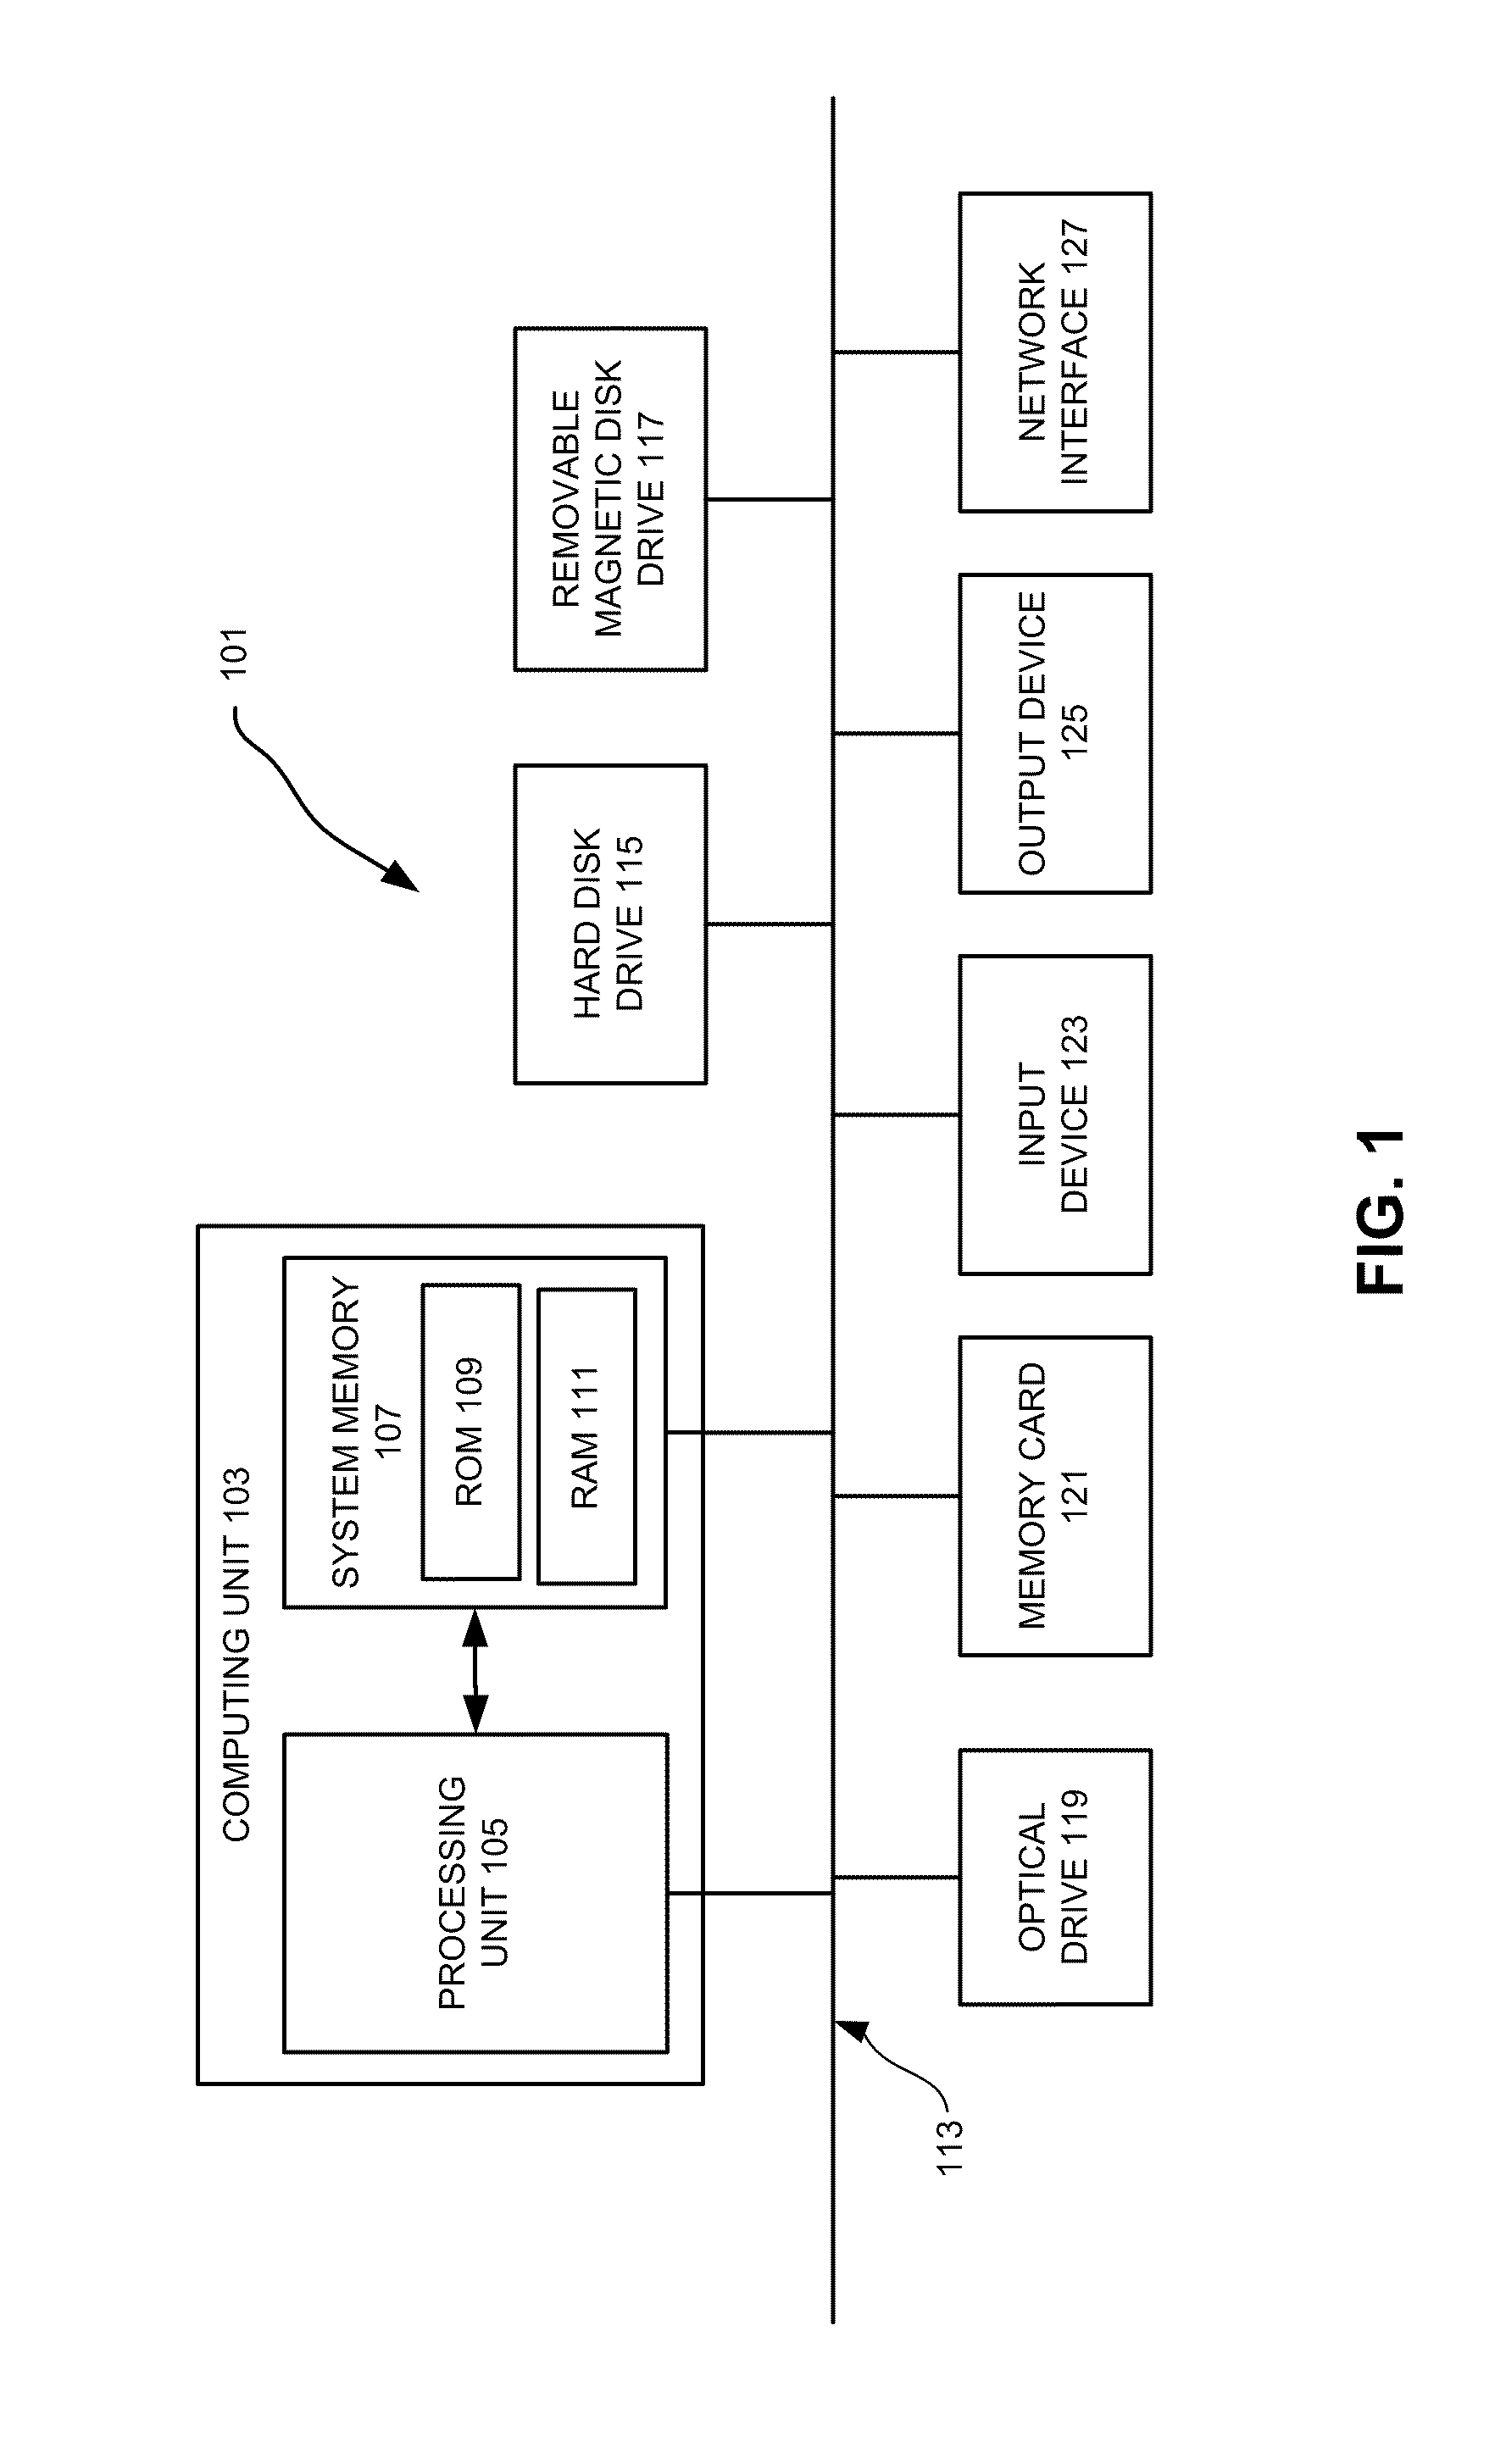 Cell-Aware Fault Model Creation And Pattern Generation